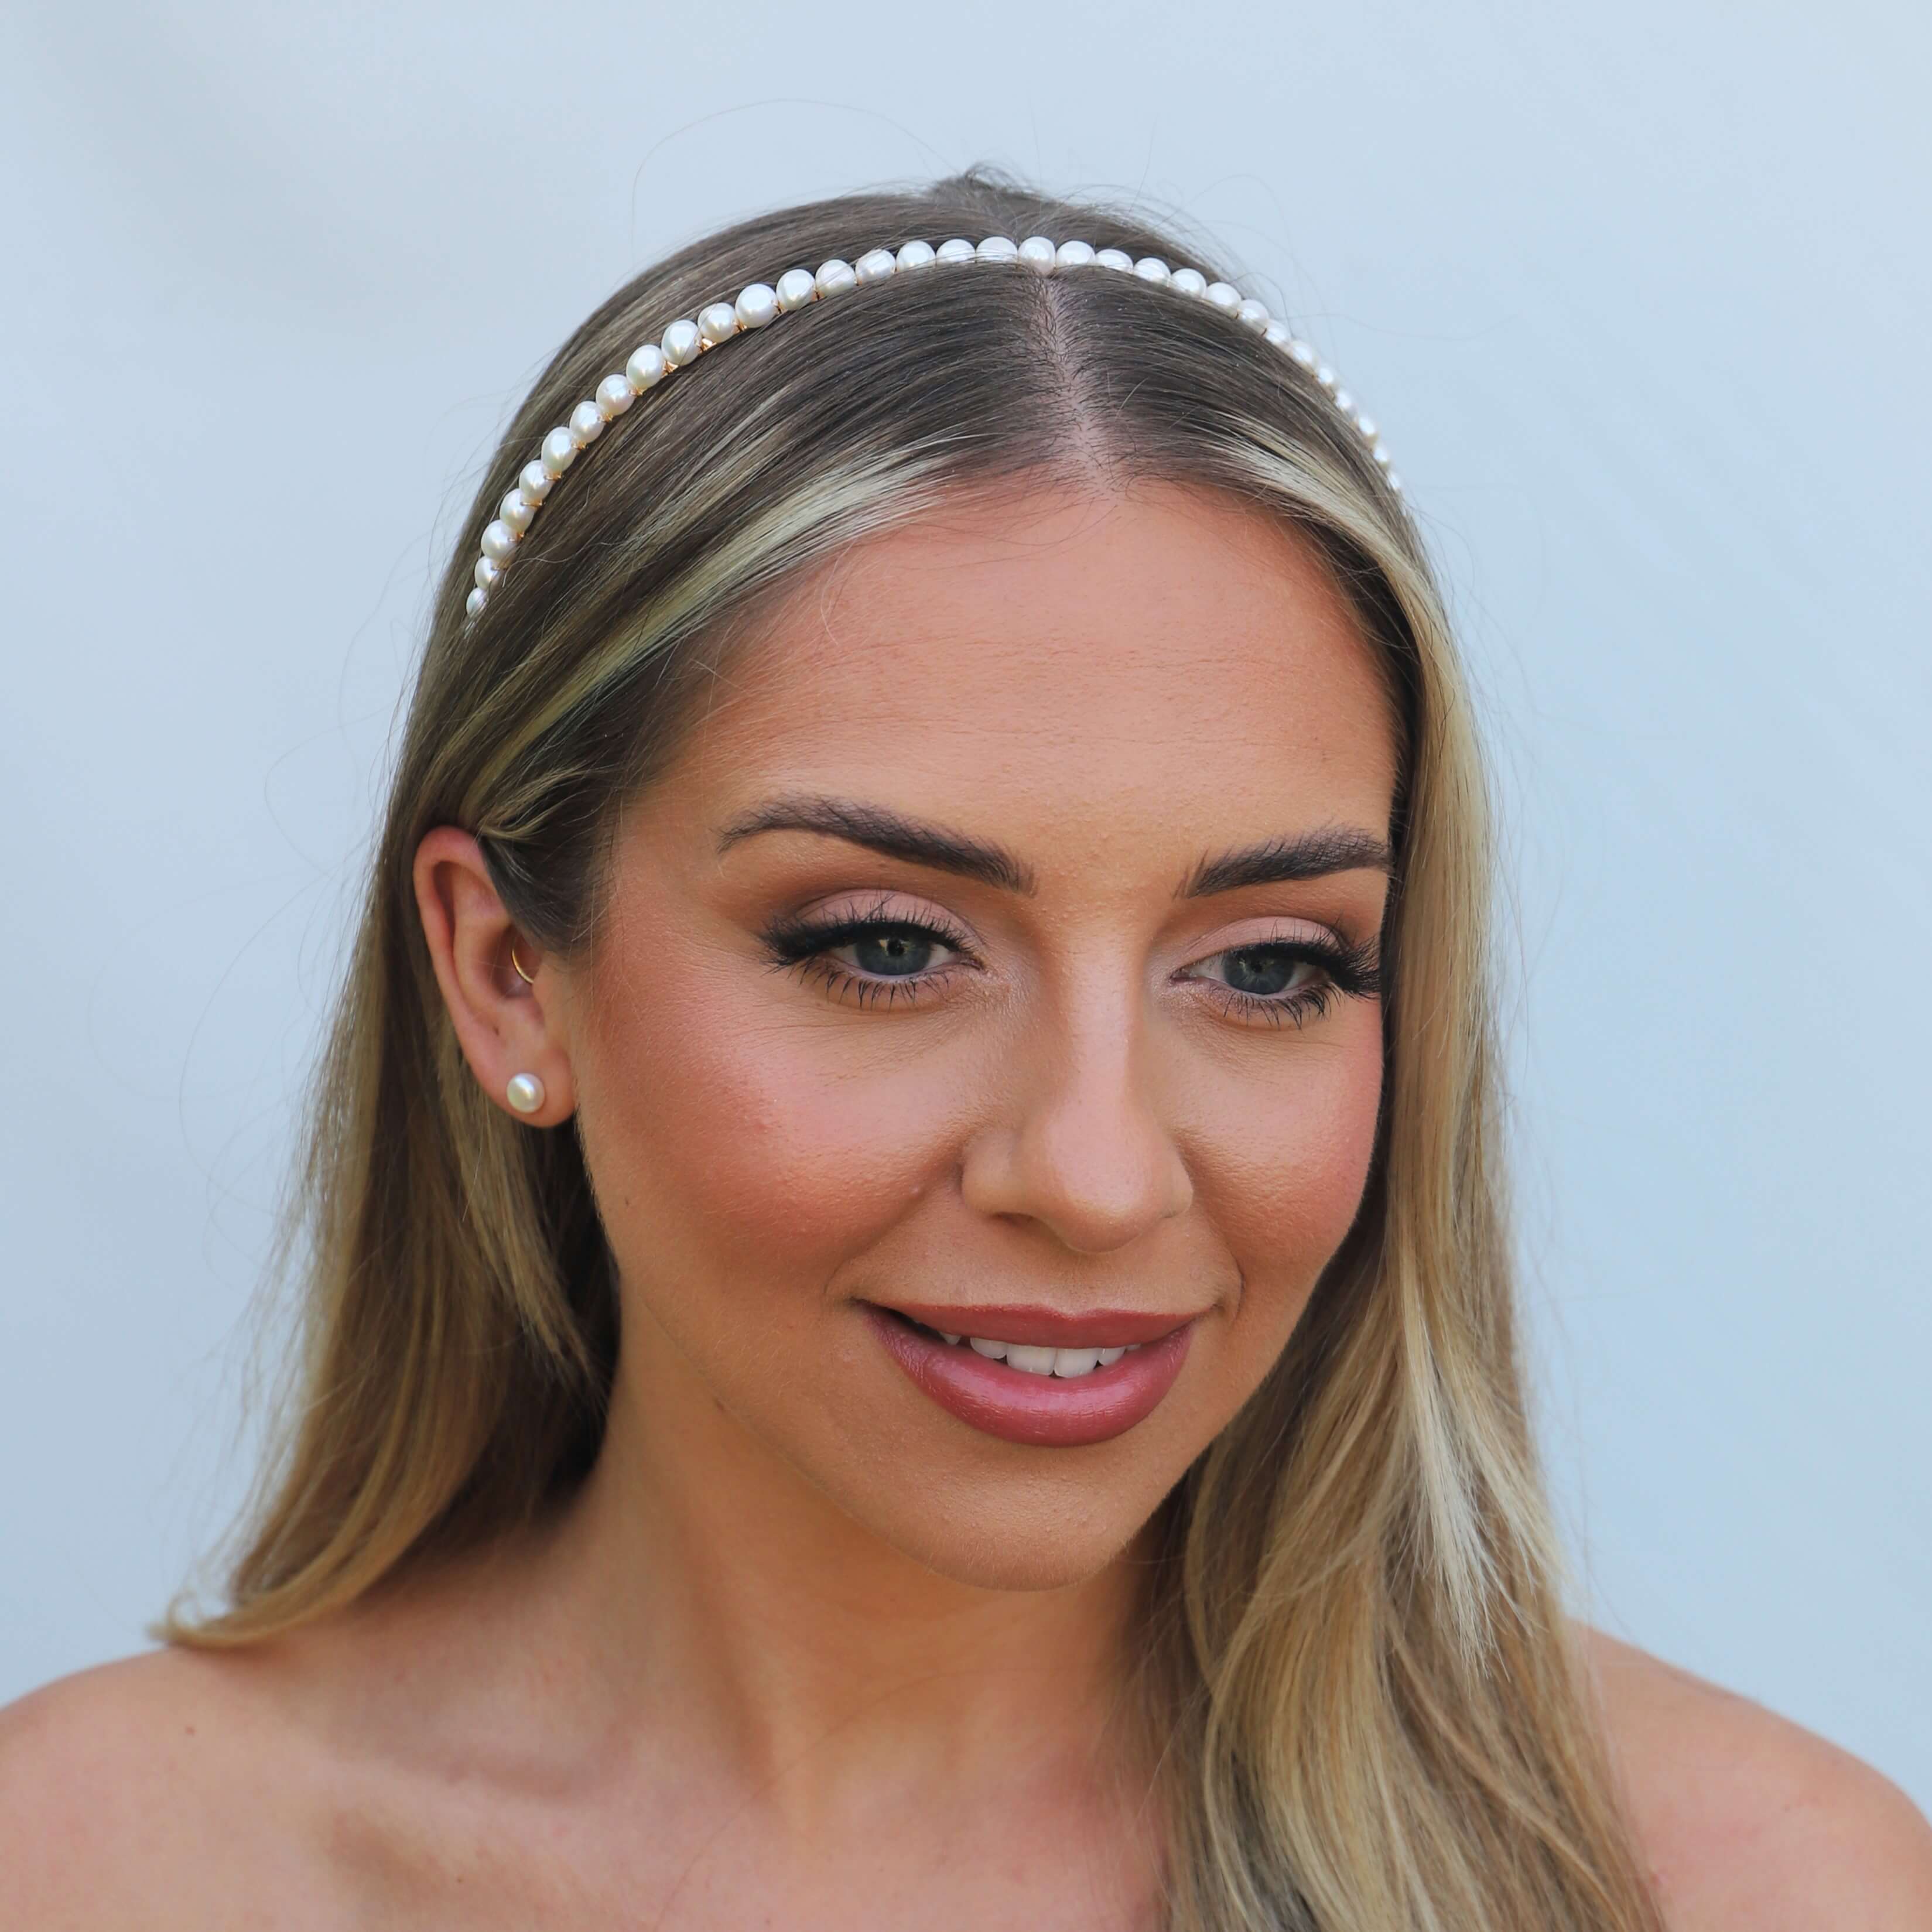 Front view of model wearing a pearl metal headband